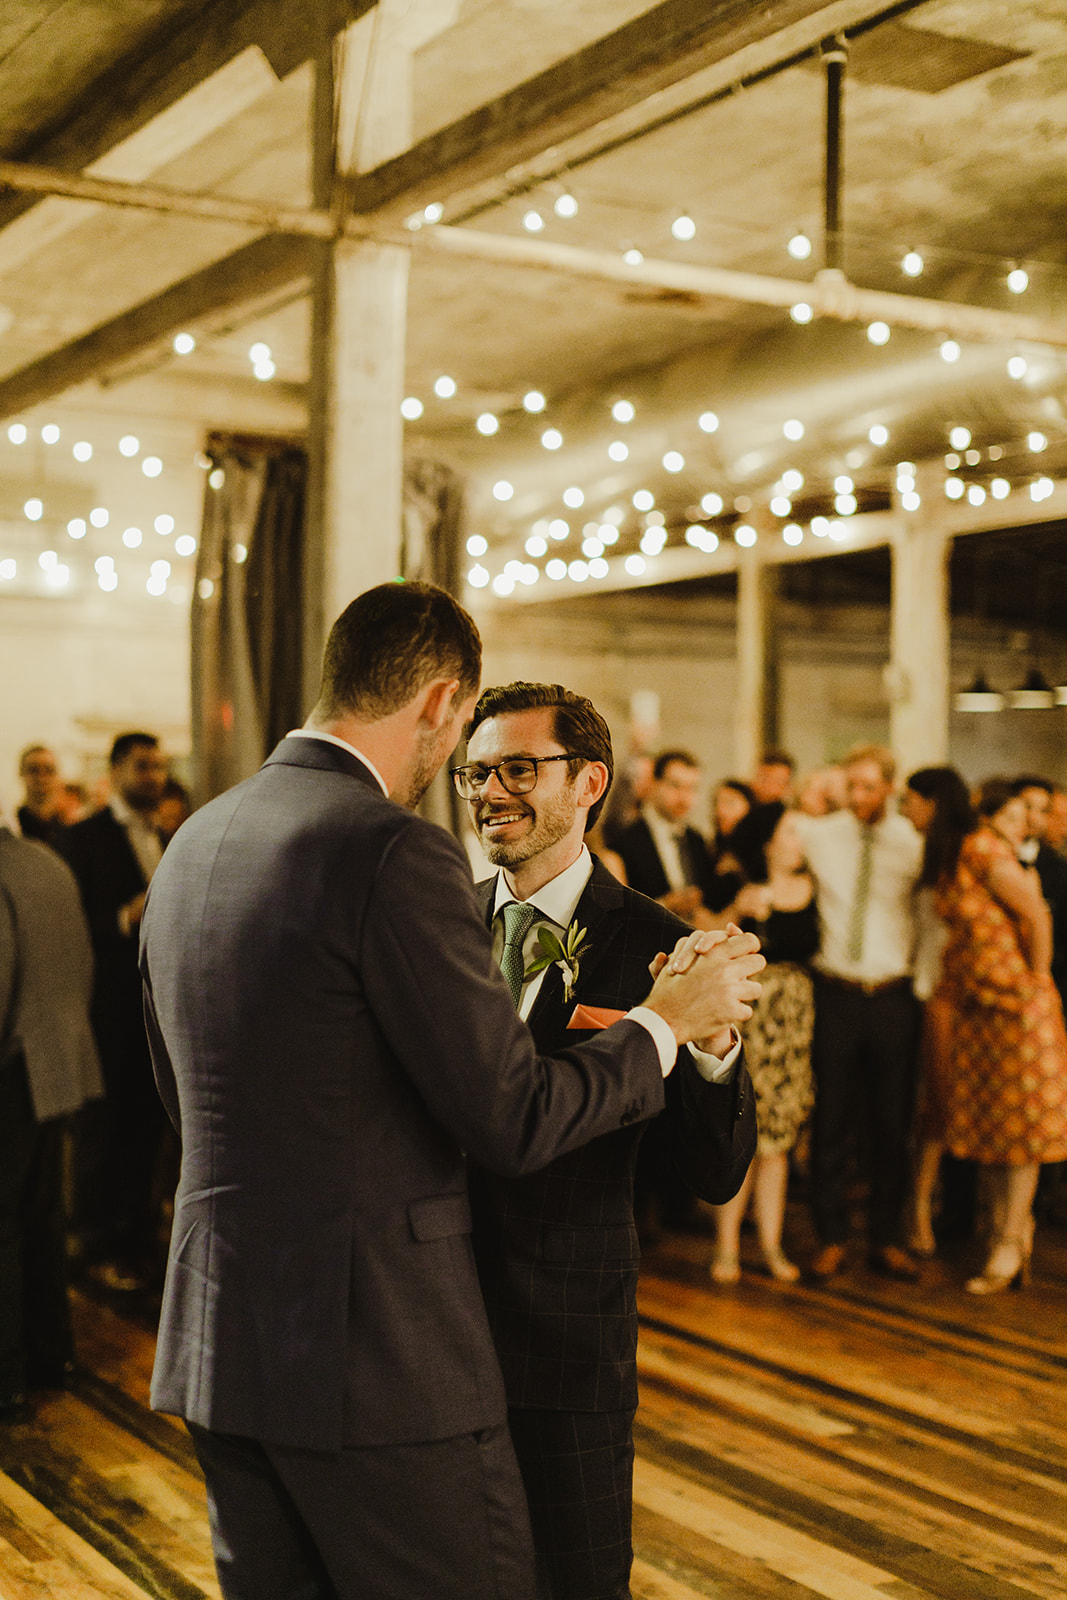 Grooms sharing their first dance